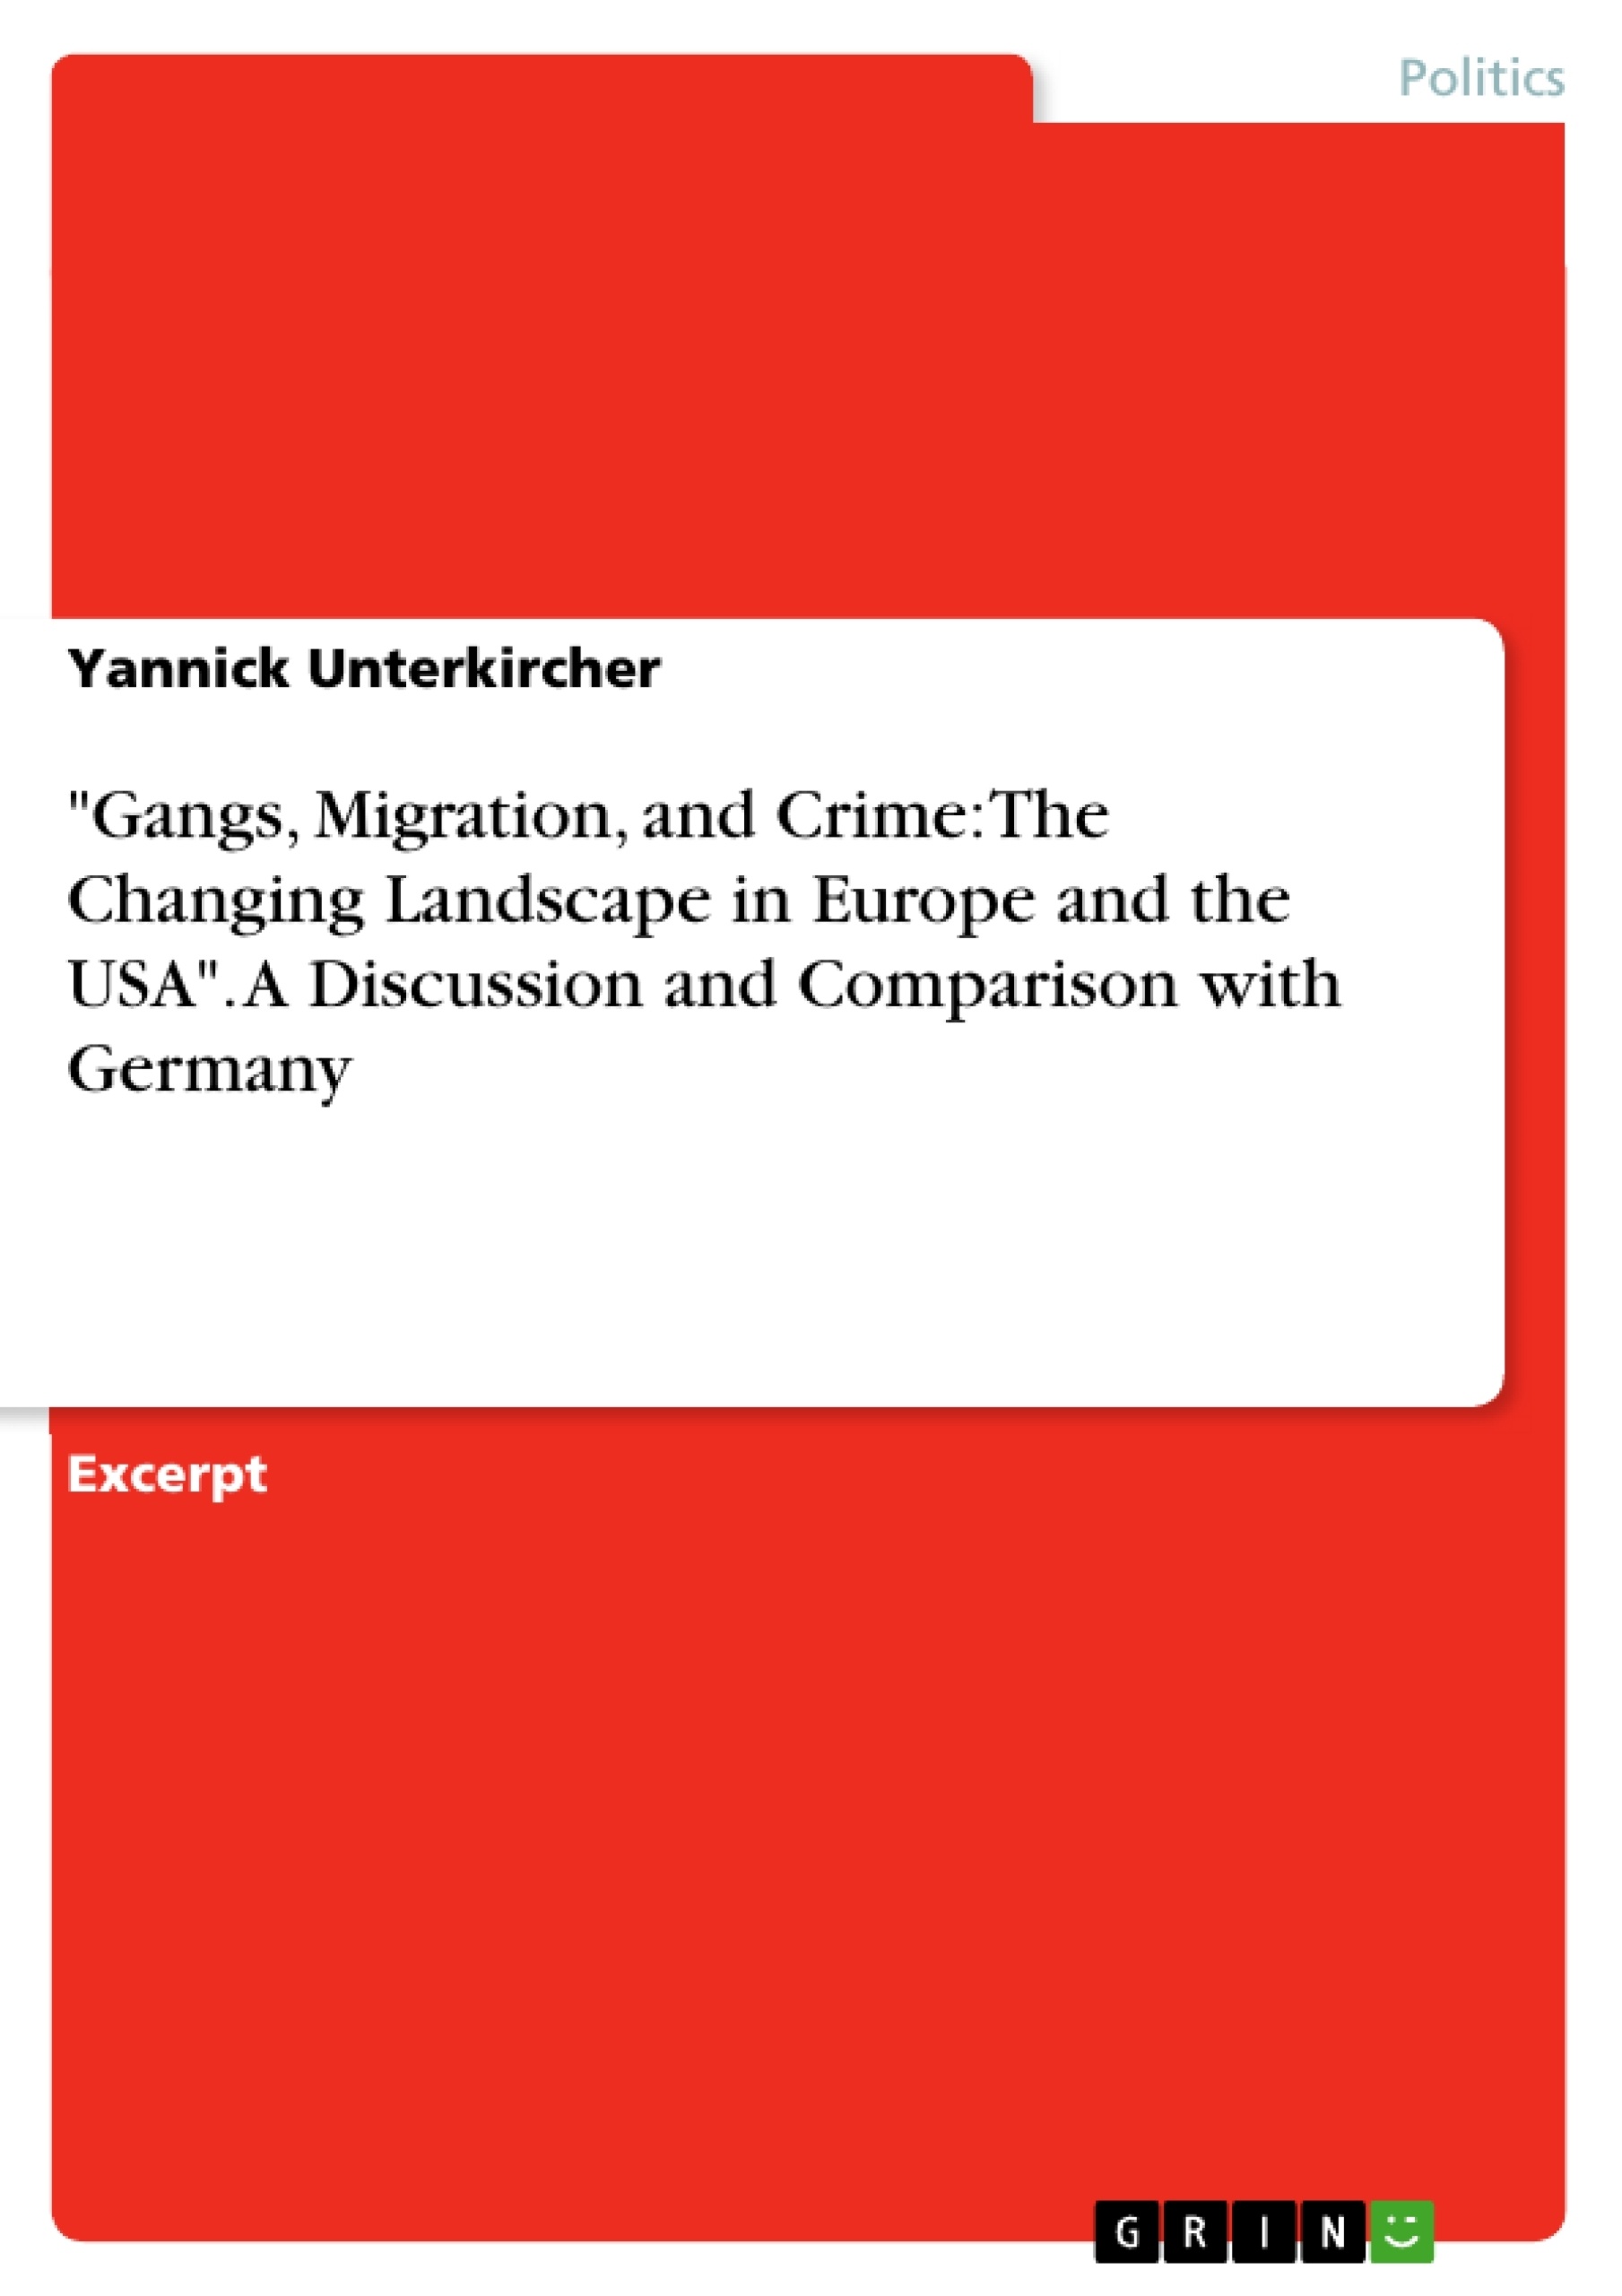 Título: "Gangs, Migration, and Crime: The Changing Landscape in Europe and the USA". A Discussion and Comparison with Germany